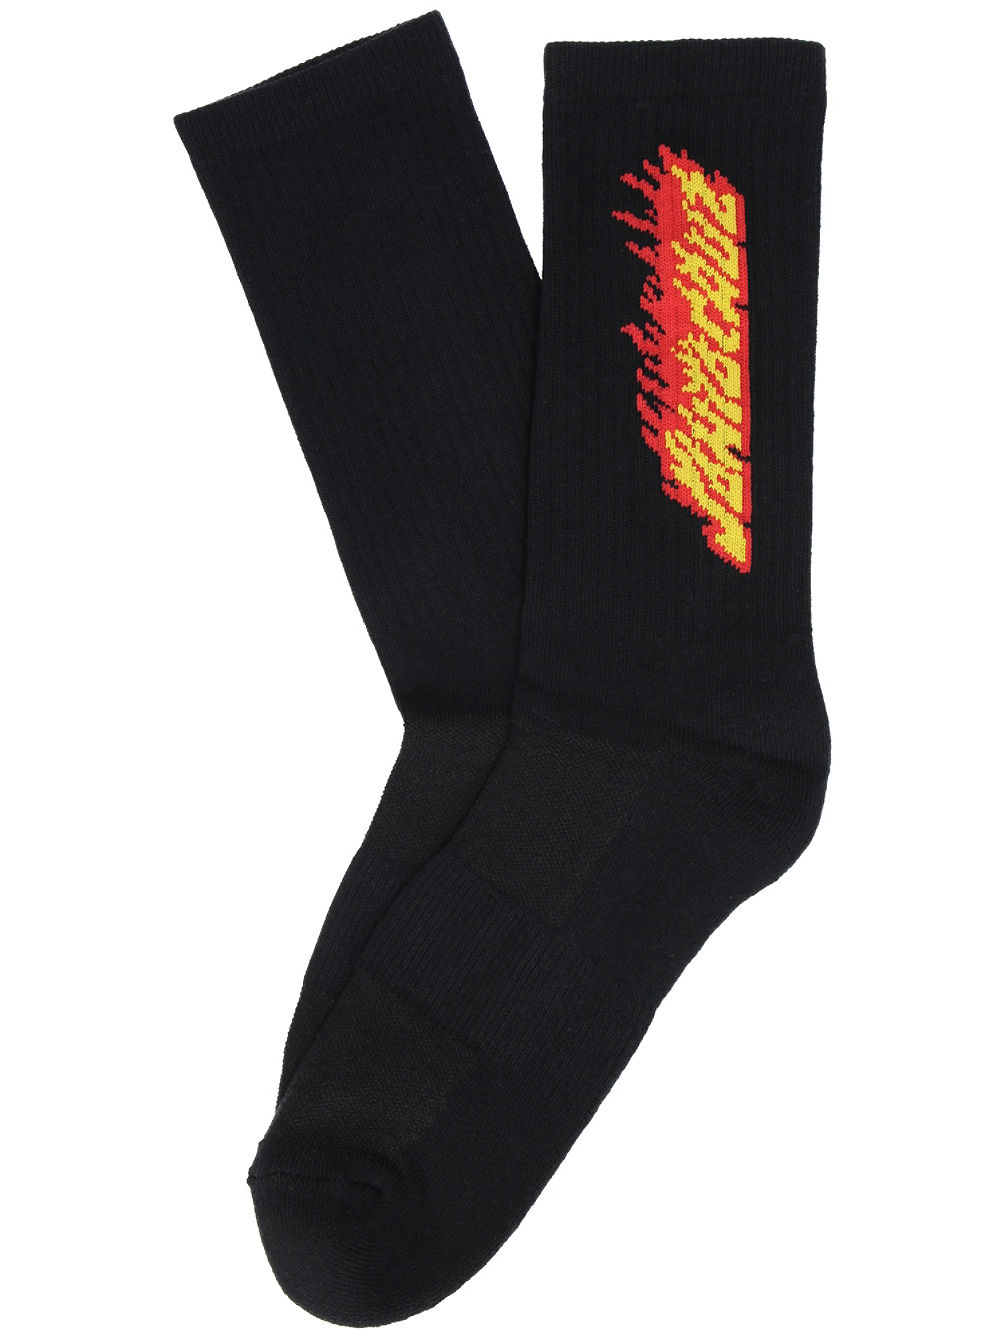 Flaming Stripe Calcetines